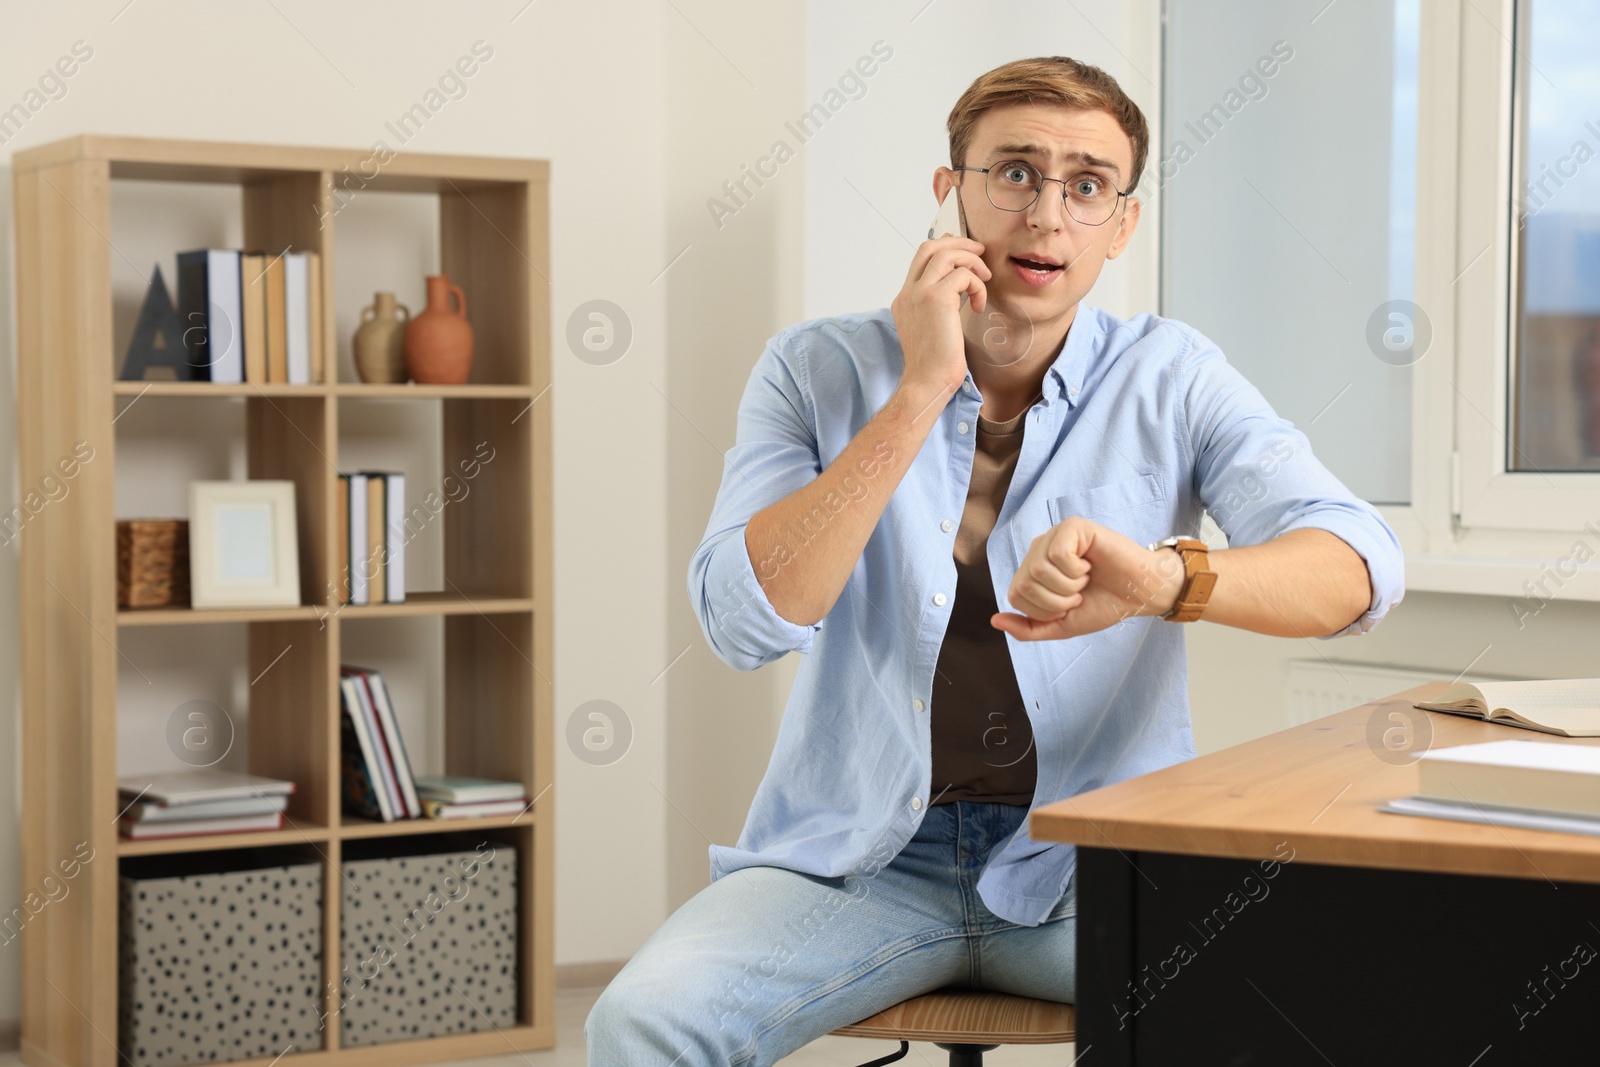 Photo of Emotional young man checking time while talking on phone in office. Being late